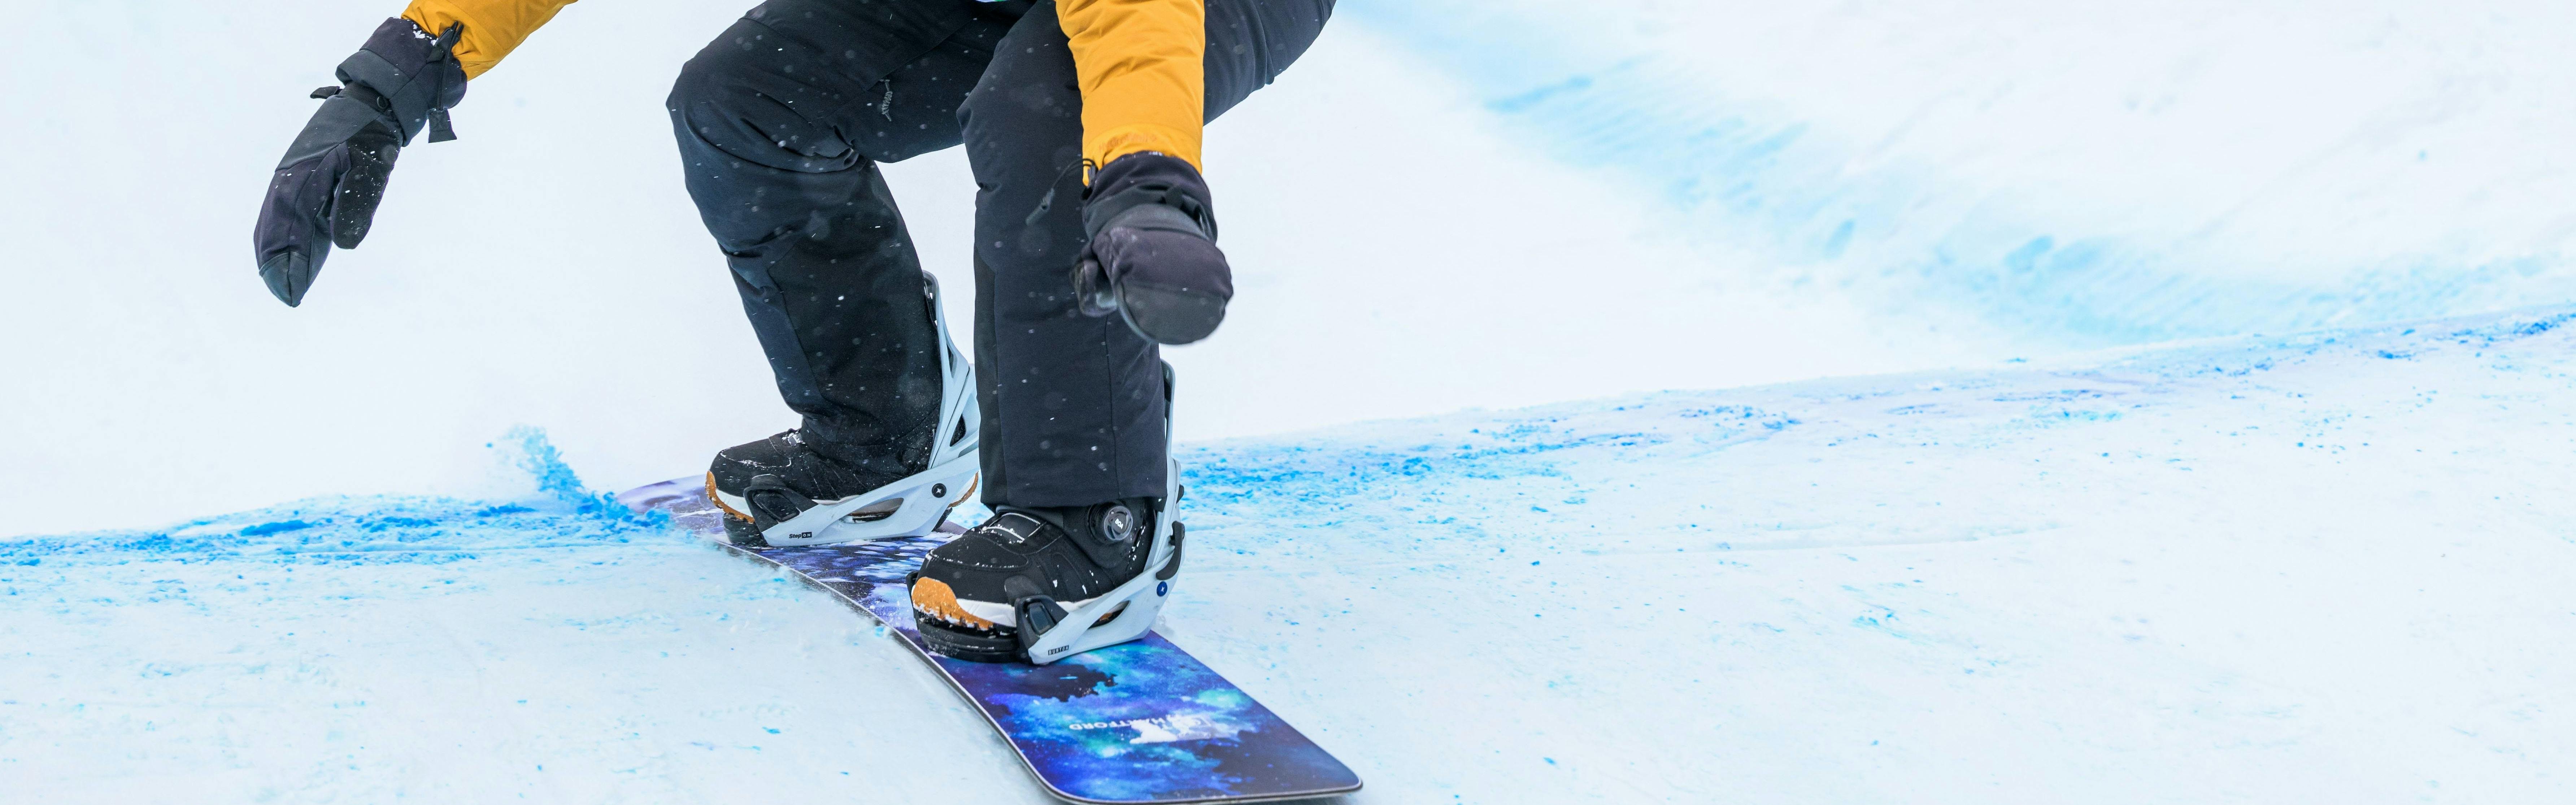 Snowboarder in yellow jacket and green race bib pumps through a roller section while racing on a banked slalom course.